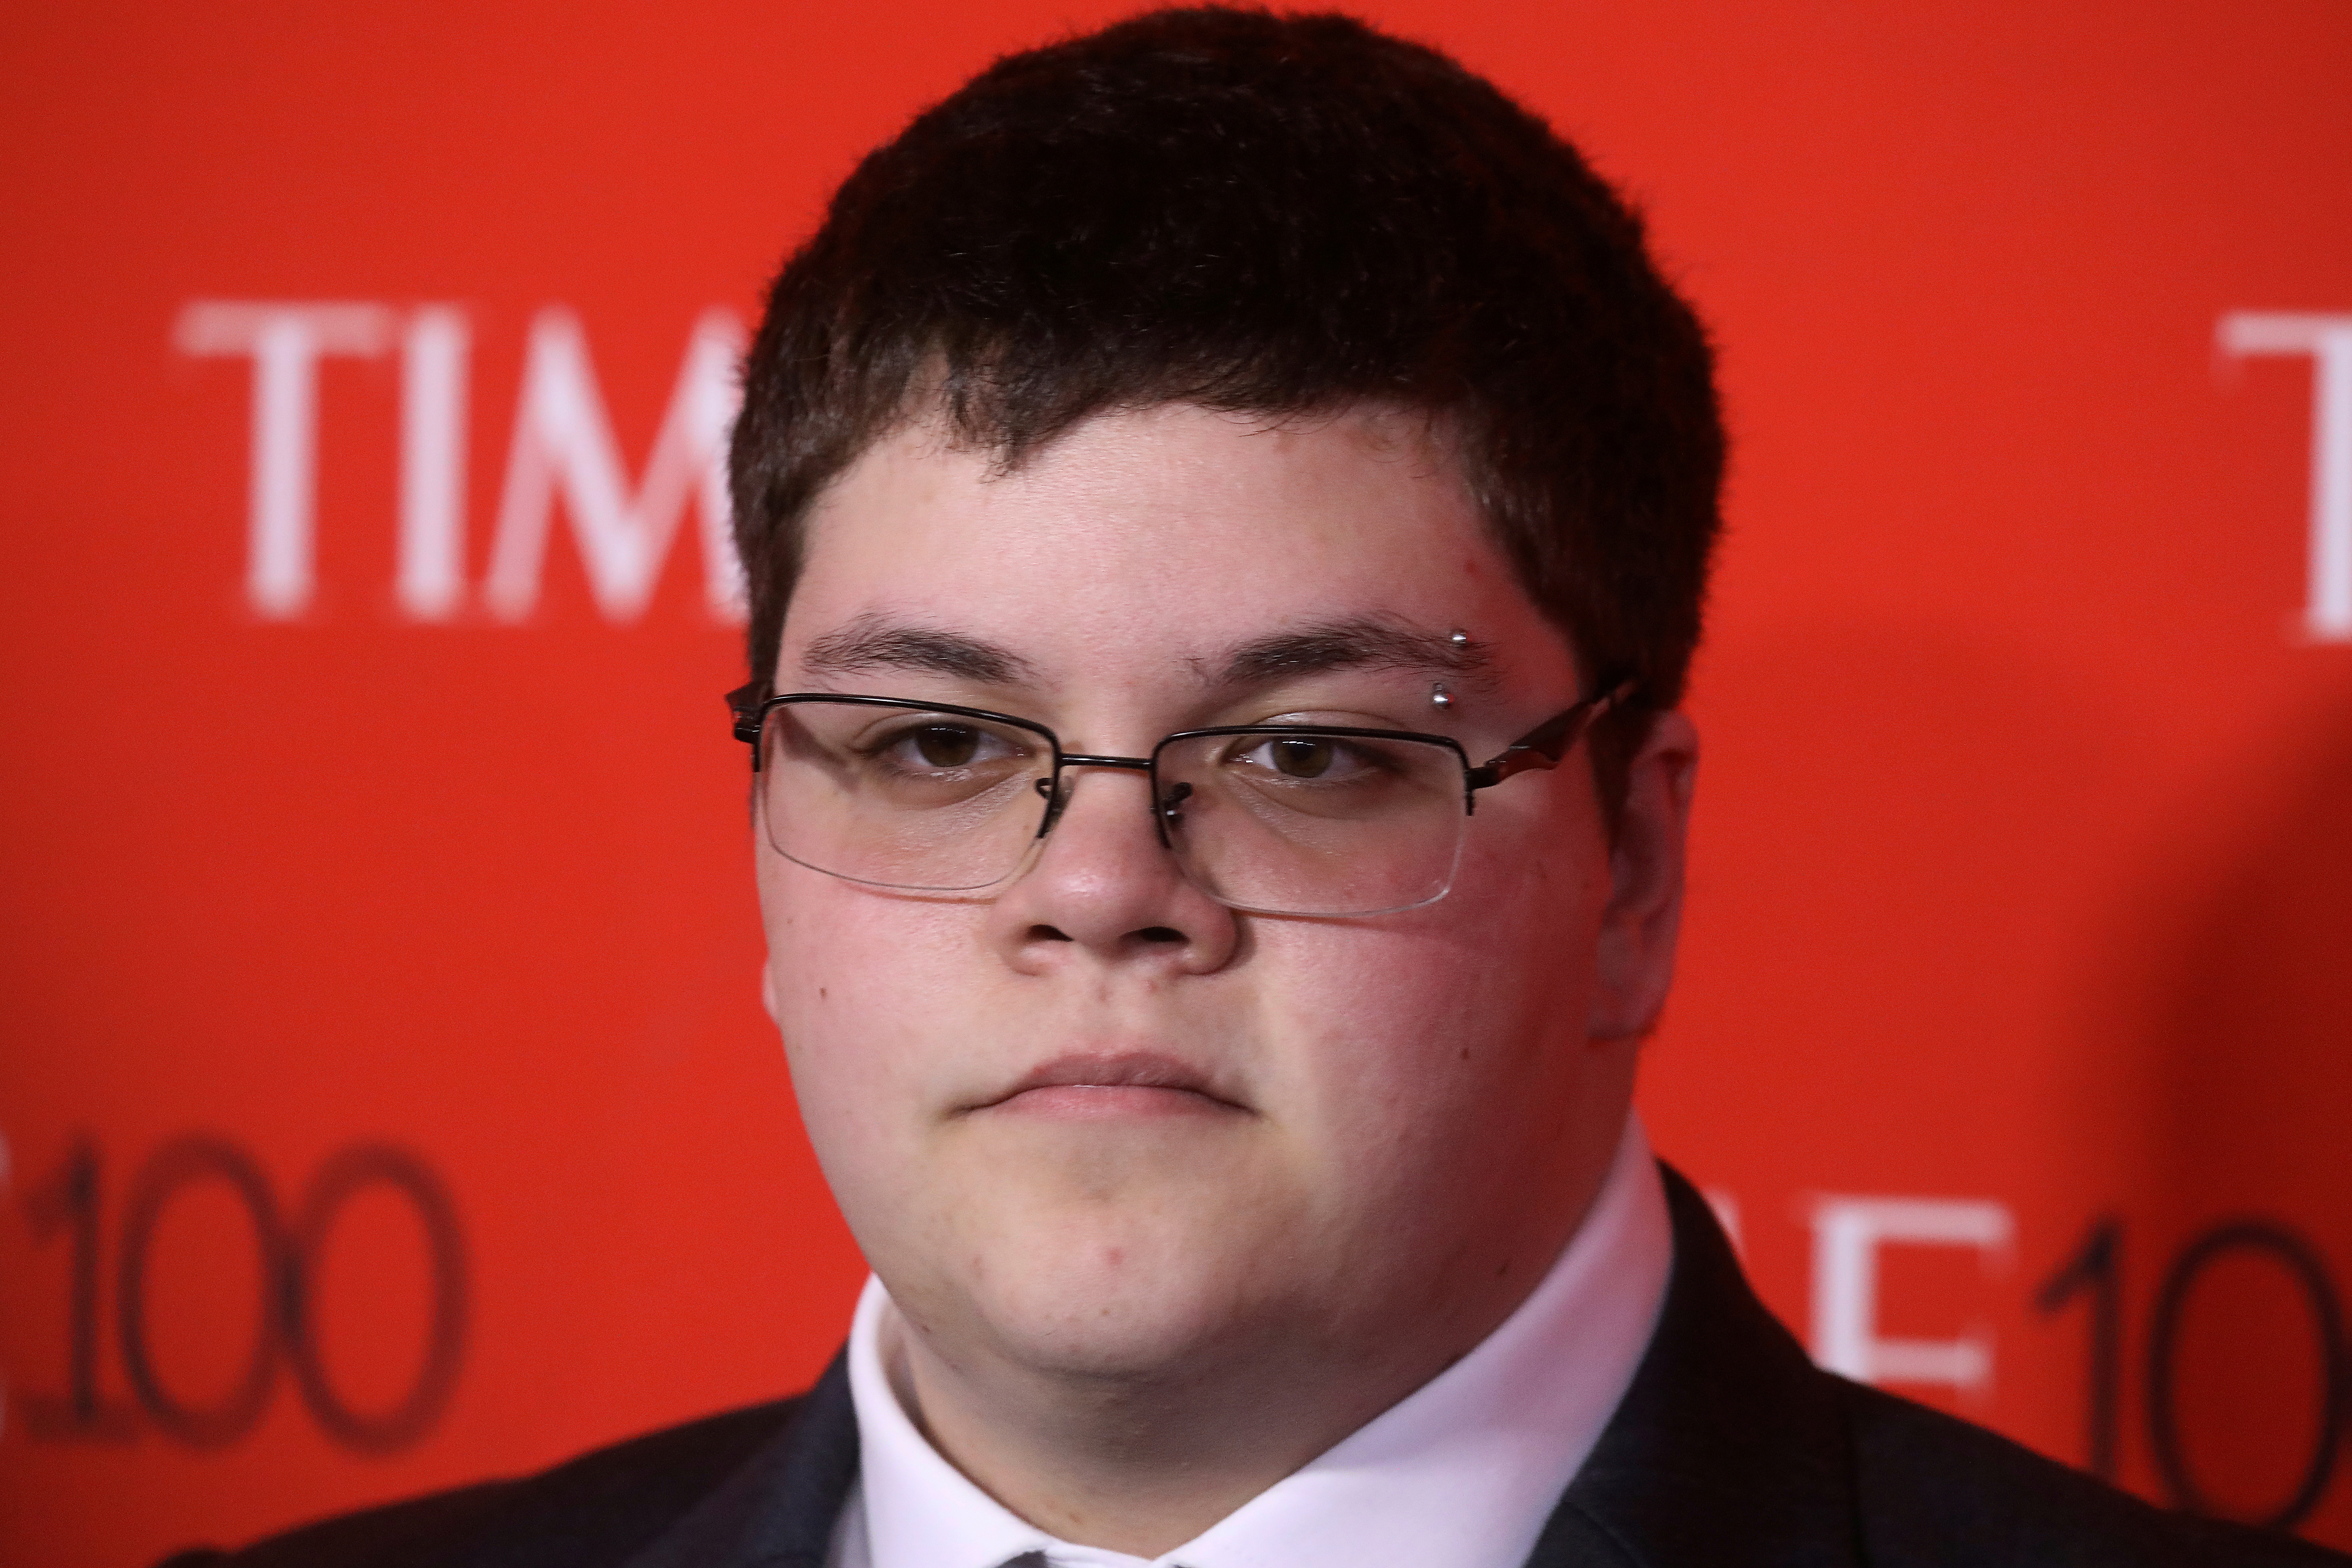 Activist Gavin Grimm arrives for the Time 100 Gala in the Manhattan borough of New York